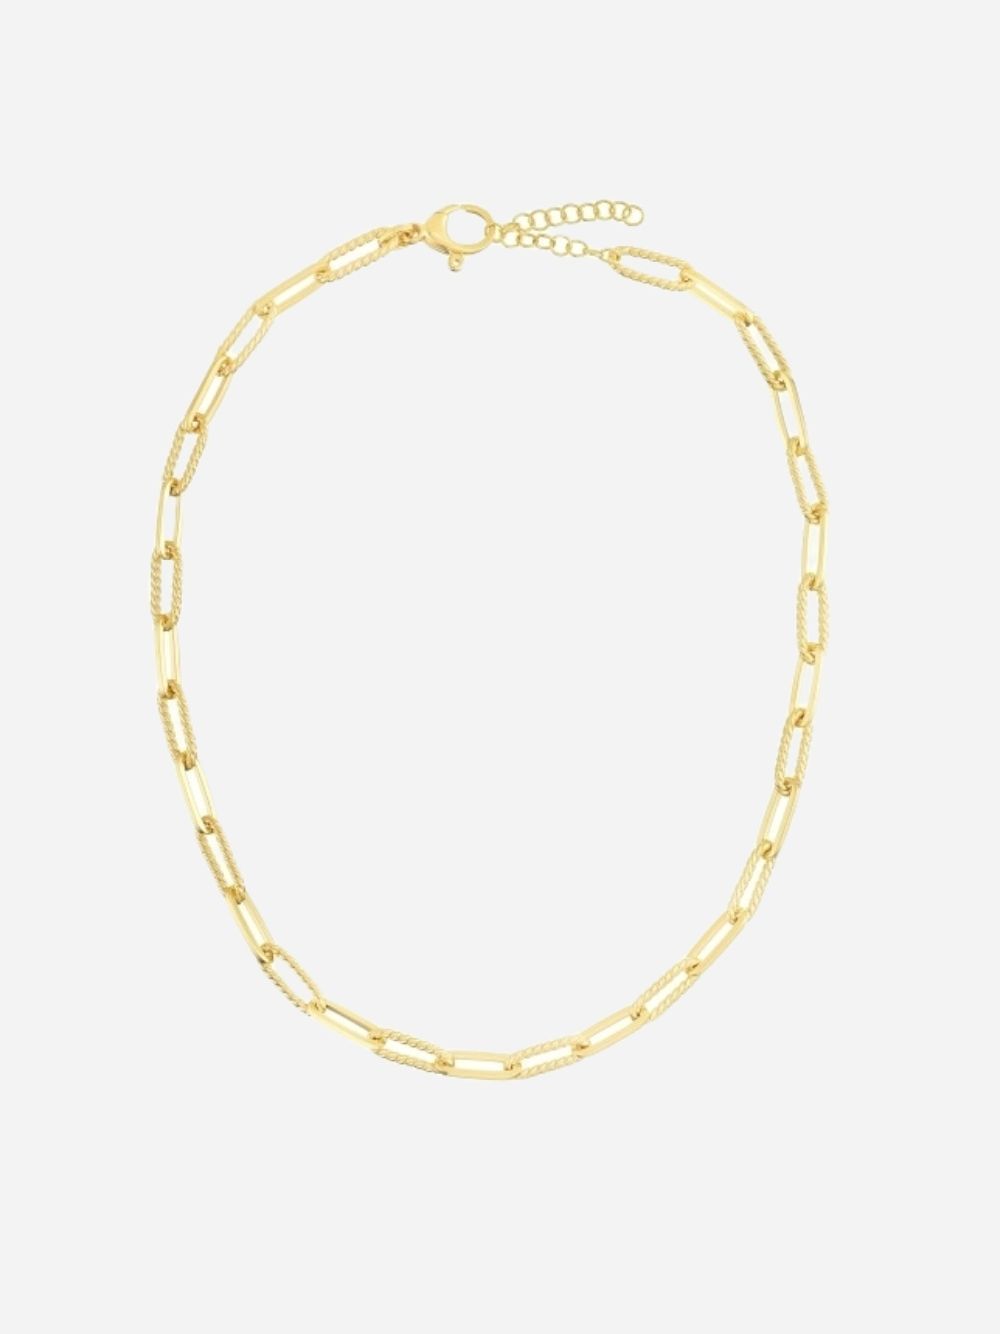 Gold Double Link Necklace